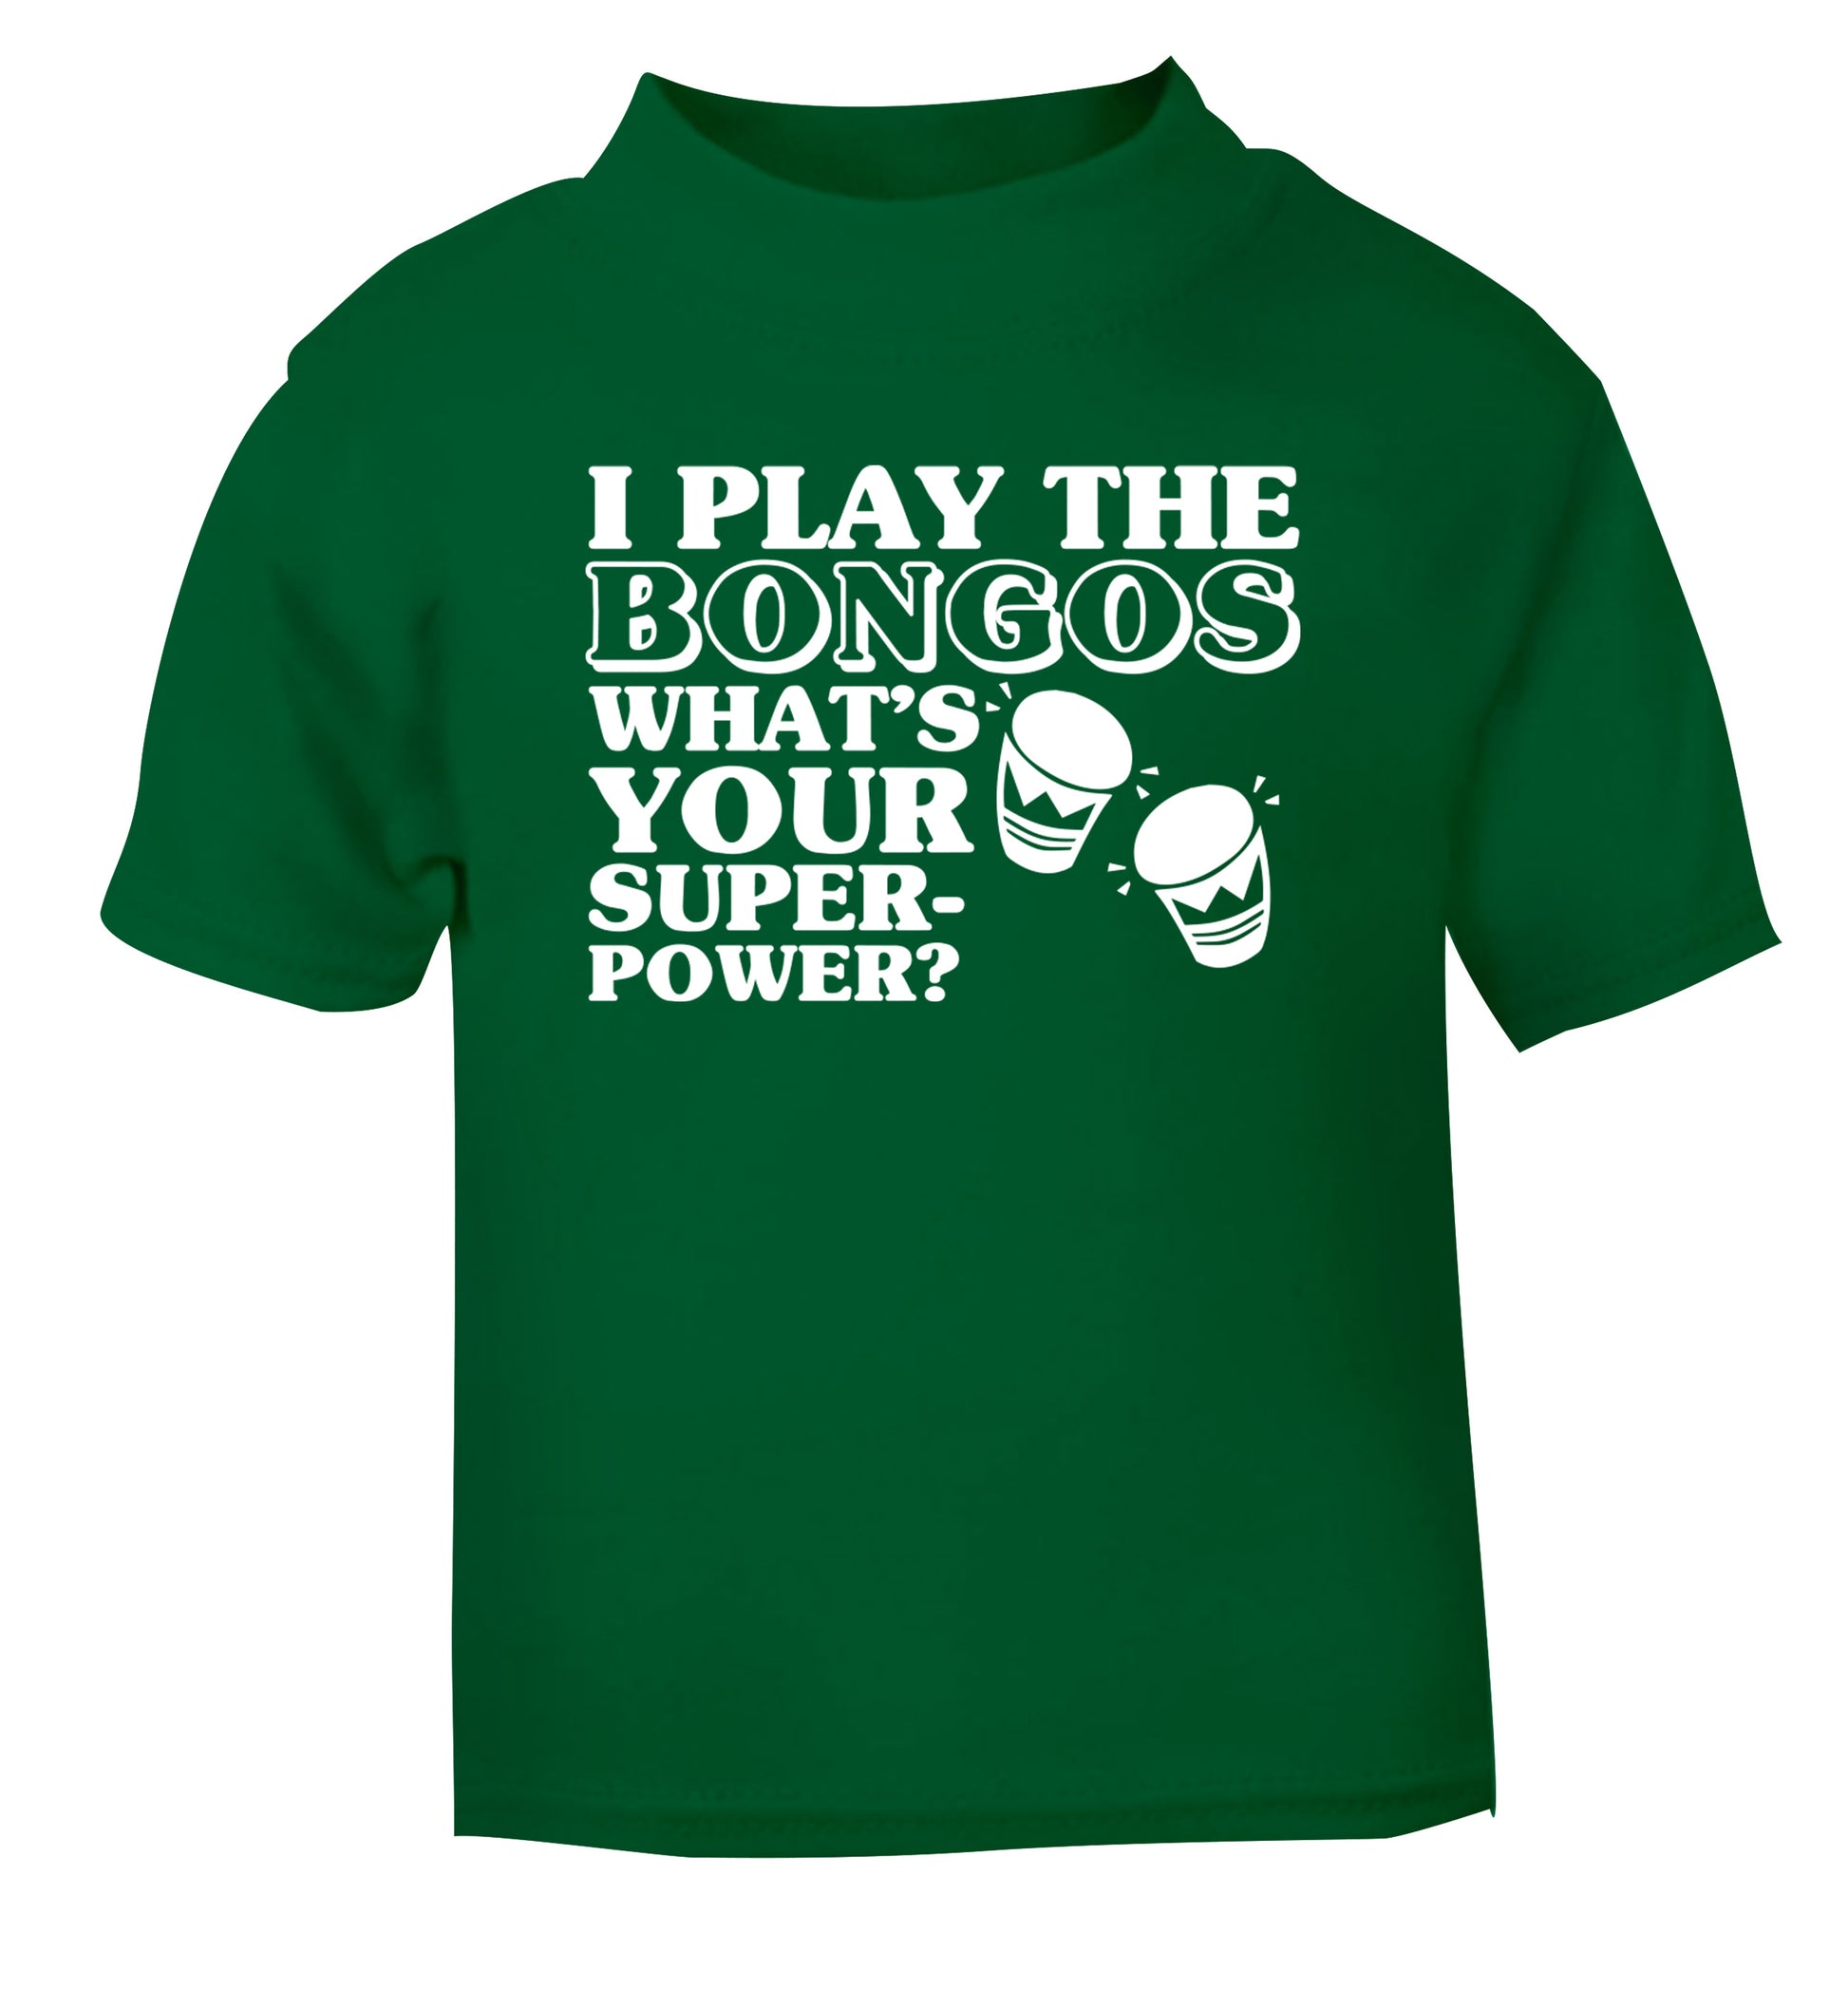 I play the bongos what's your superpower? green Baby Toddler Tshirt 2 Years